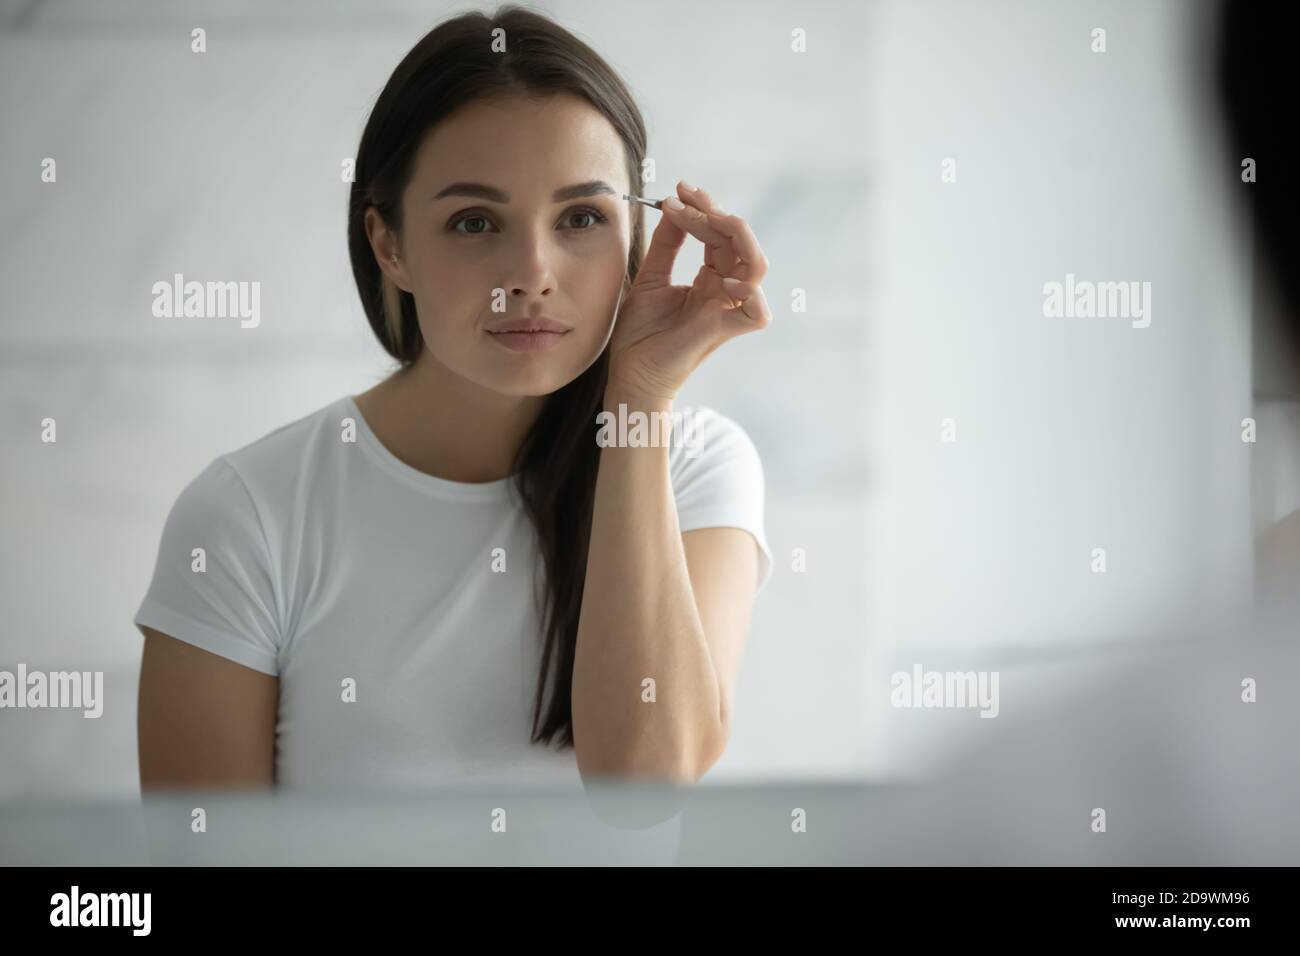 Concentrated young female doing sharp accurate eyebrow contours using tweezer Stock Photo